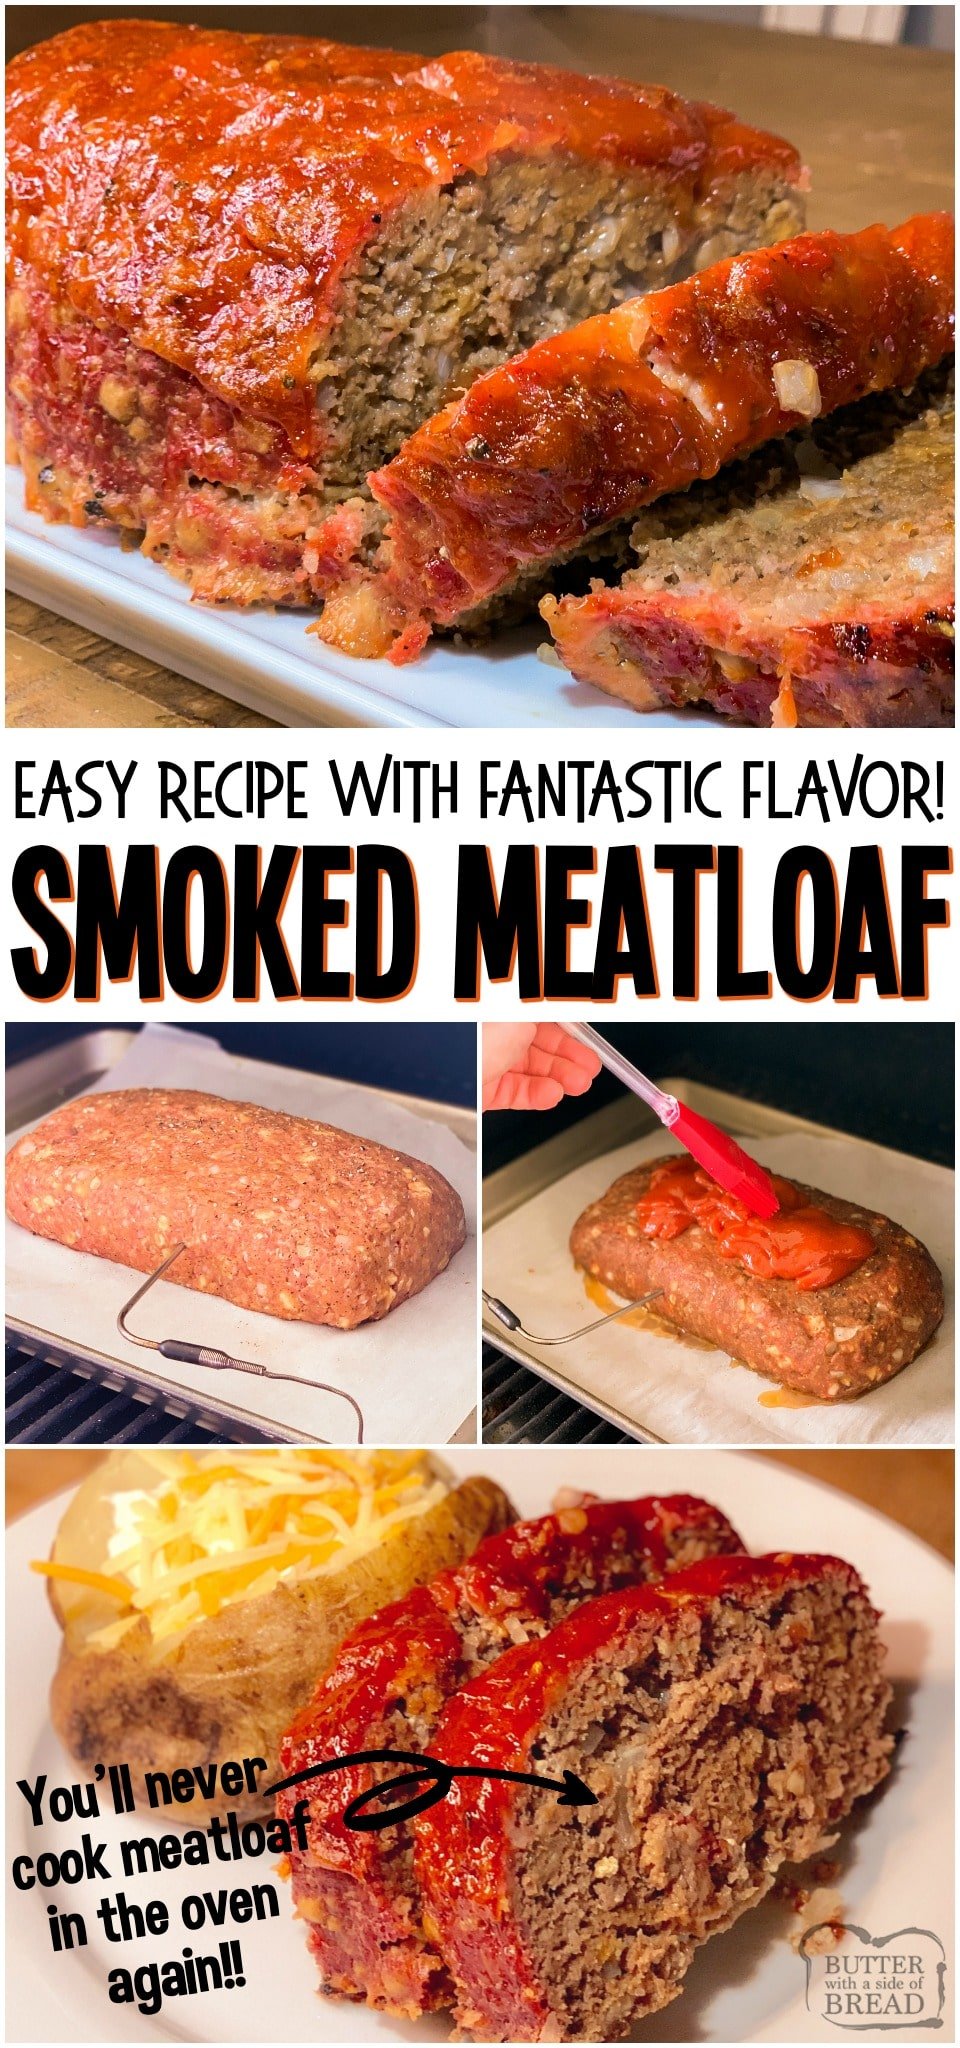 Easy Smoked Meatloaf made with common ingredients for a classic meatloaf recipe with incredible flavor! Take dinner up a notch with this meatloaf recipe cooked in a smoker. #meatloaf #dinner #beef #smoked #smoker #easyrecipe from BUTTER WITH A SIDE OF BREAD